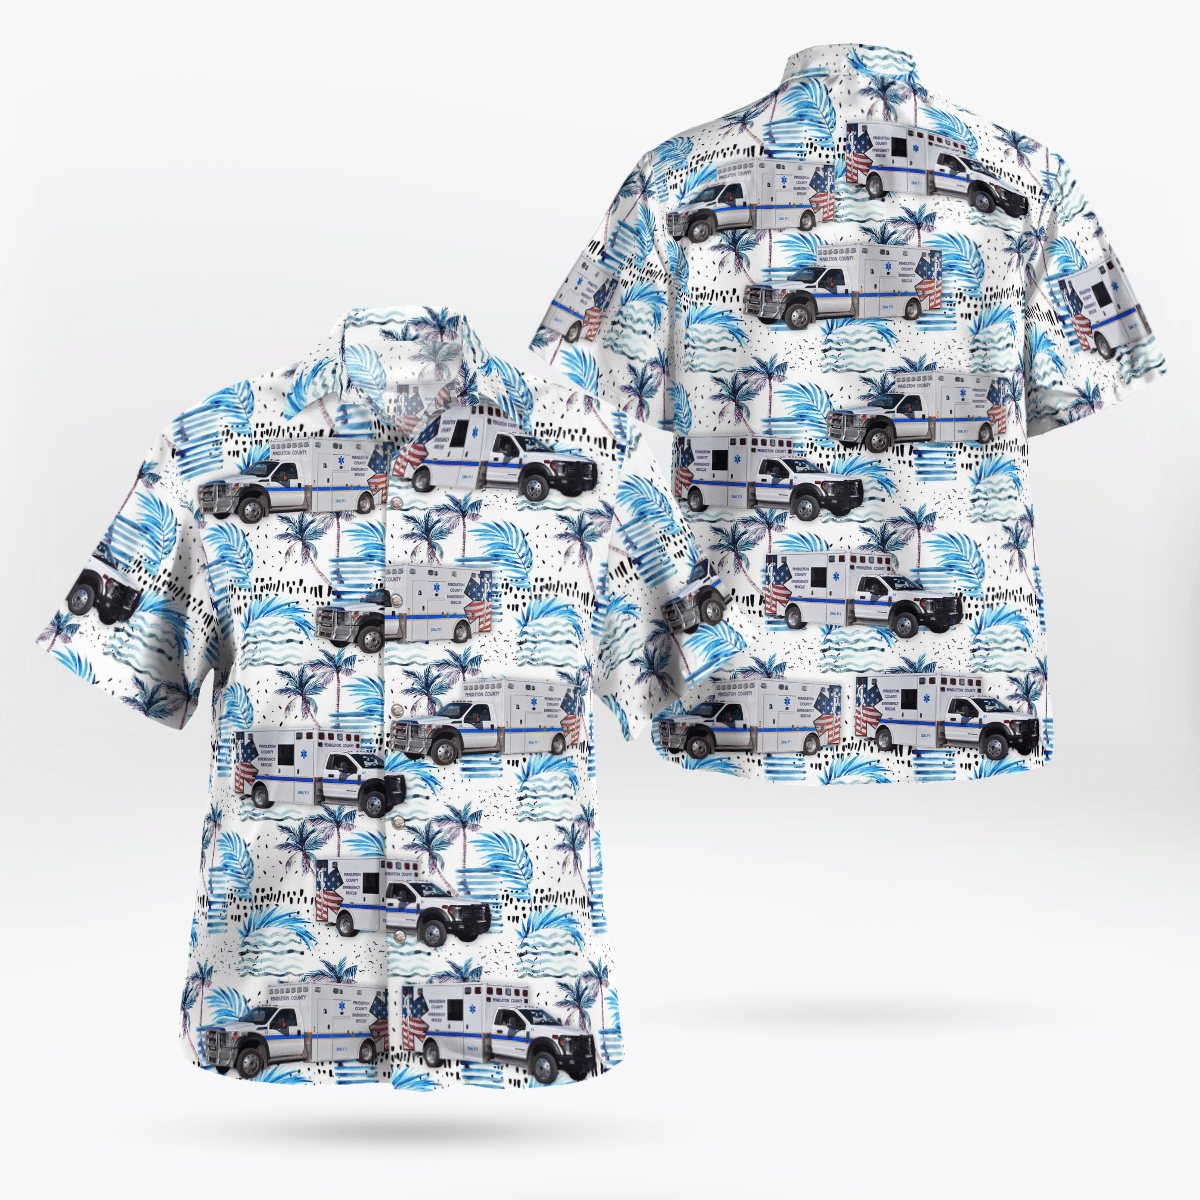 If you are in need of a new summertime look, pick up this Hawaiian shirt 40